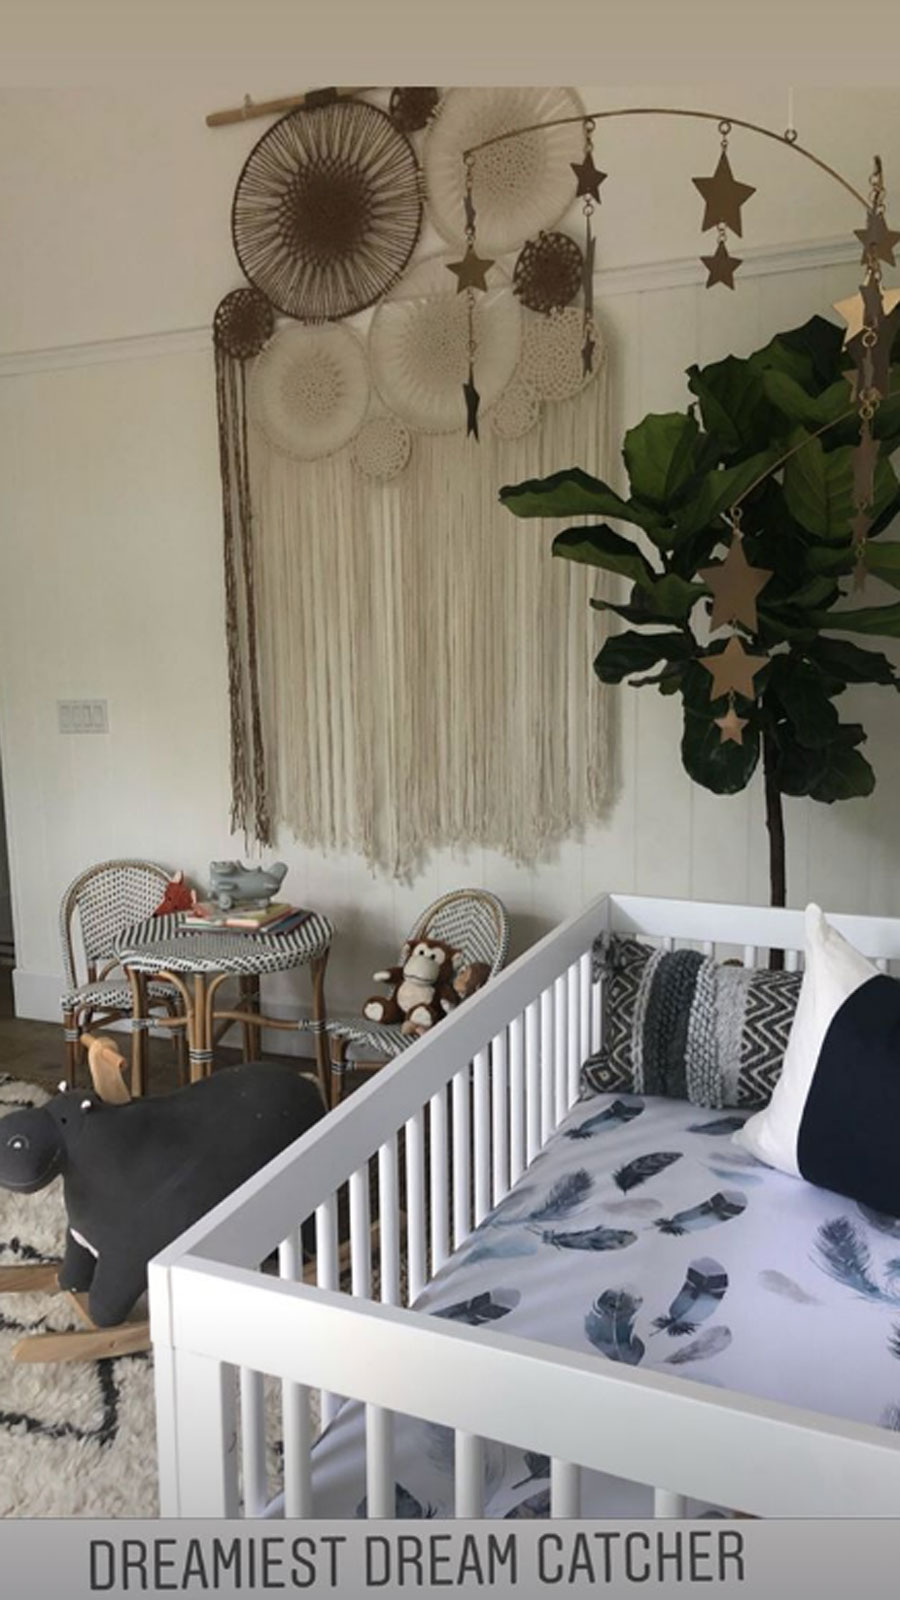 Pregnant Christina Anstead Gives 1st Look at Baby’s ‘Boho’ Nursery Ahead of Birth: Dreamcatchers, Plants and More